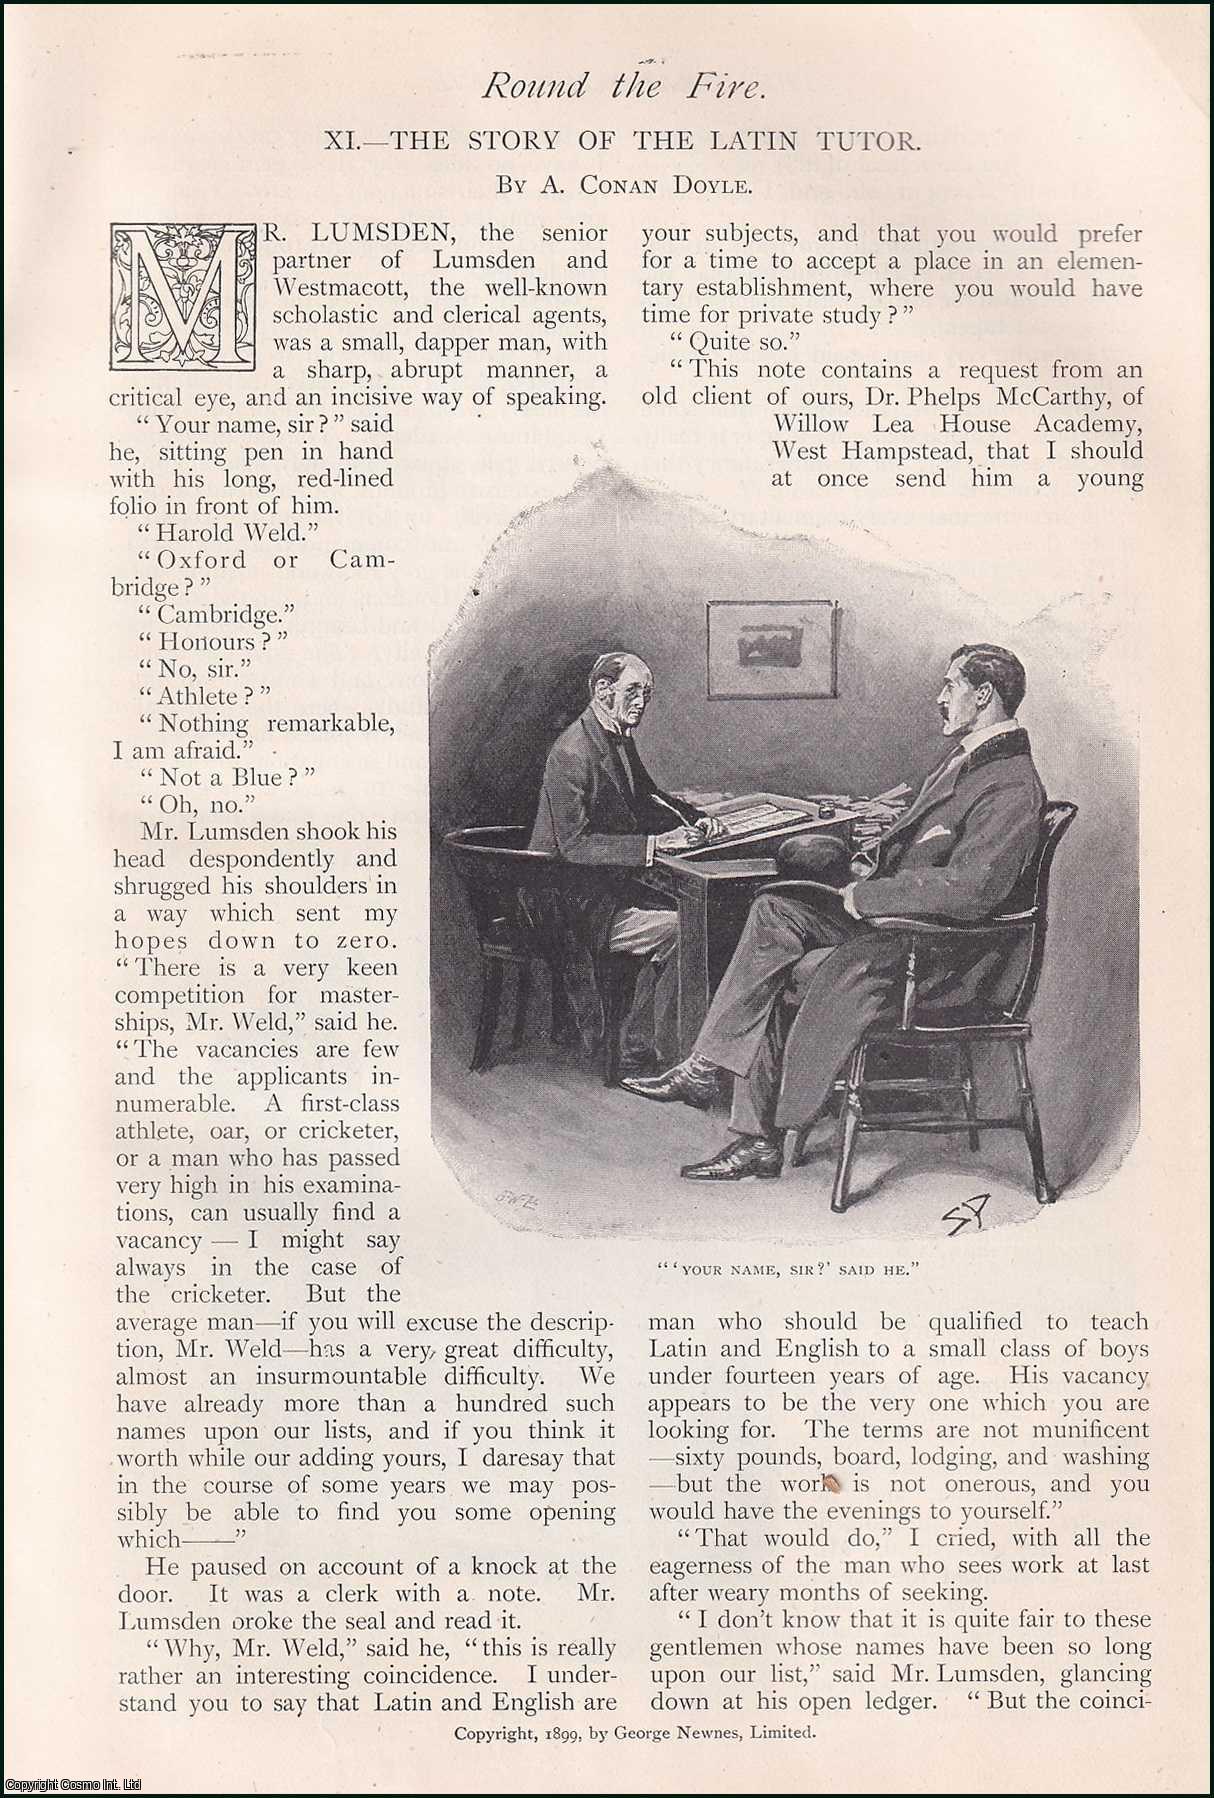 Arthur Conan Doyle - The Story of the Latin Tutor : round the Fire. By A. Conan Doyle. An uncommon original article from The Strand Magazine, 1899.